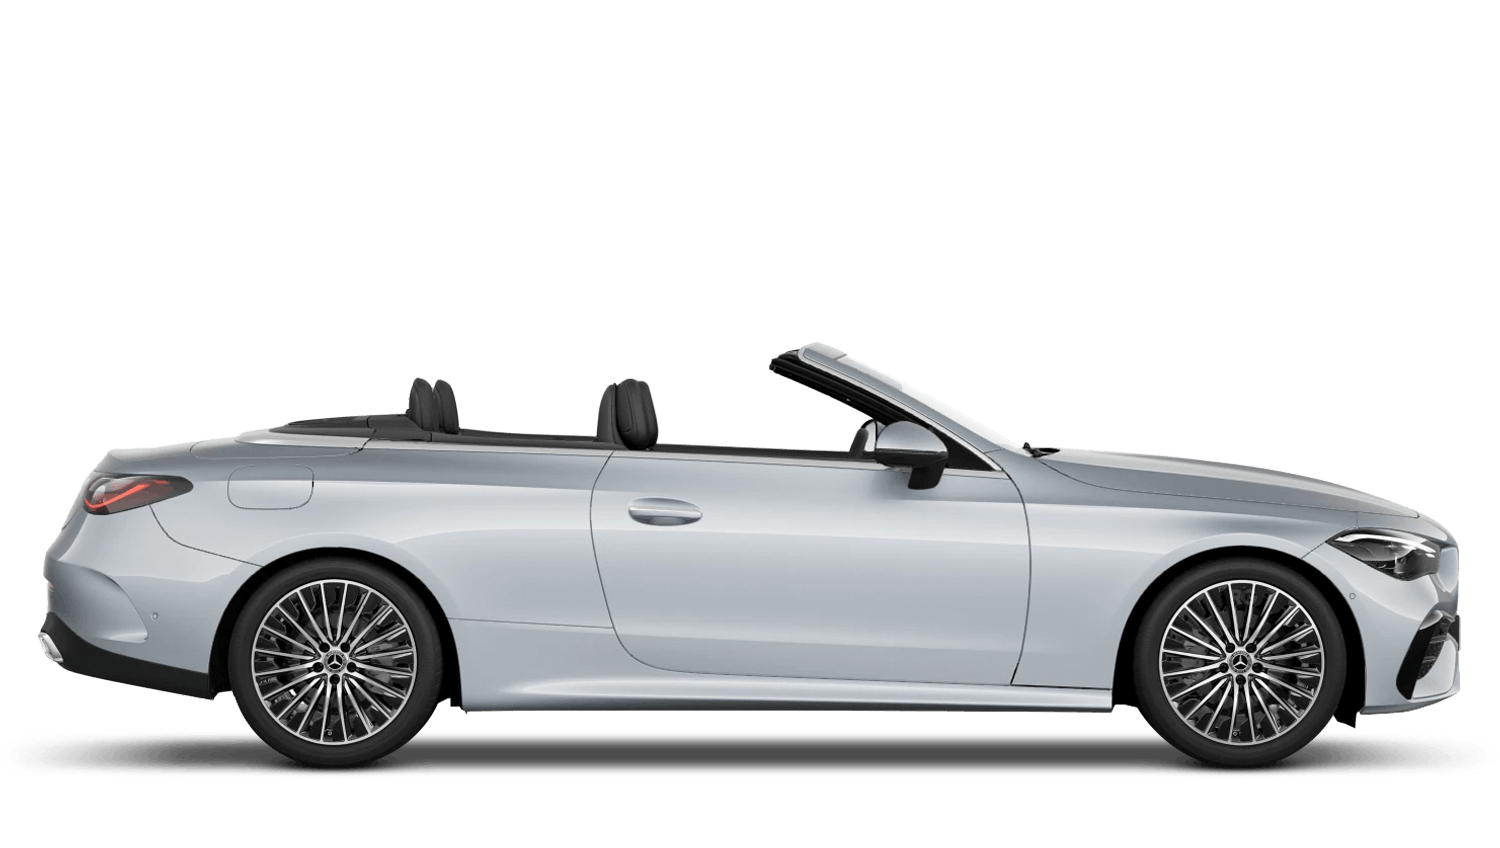 New Mercedes Benz CLE Cabriolet for Sale | Finance Options